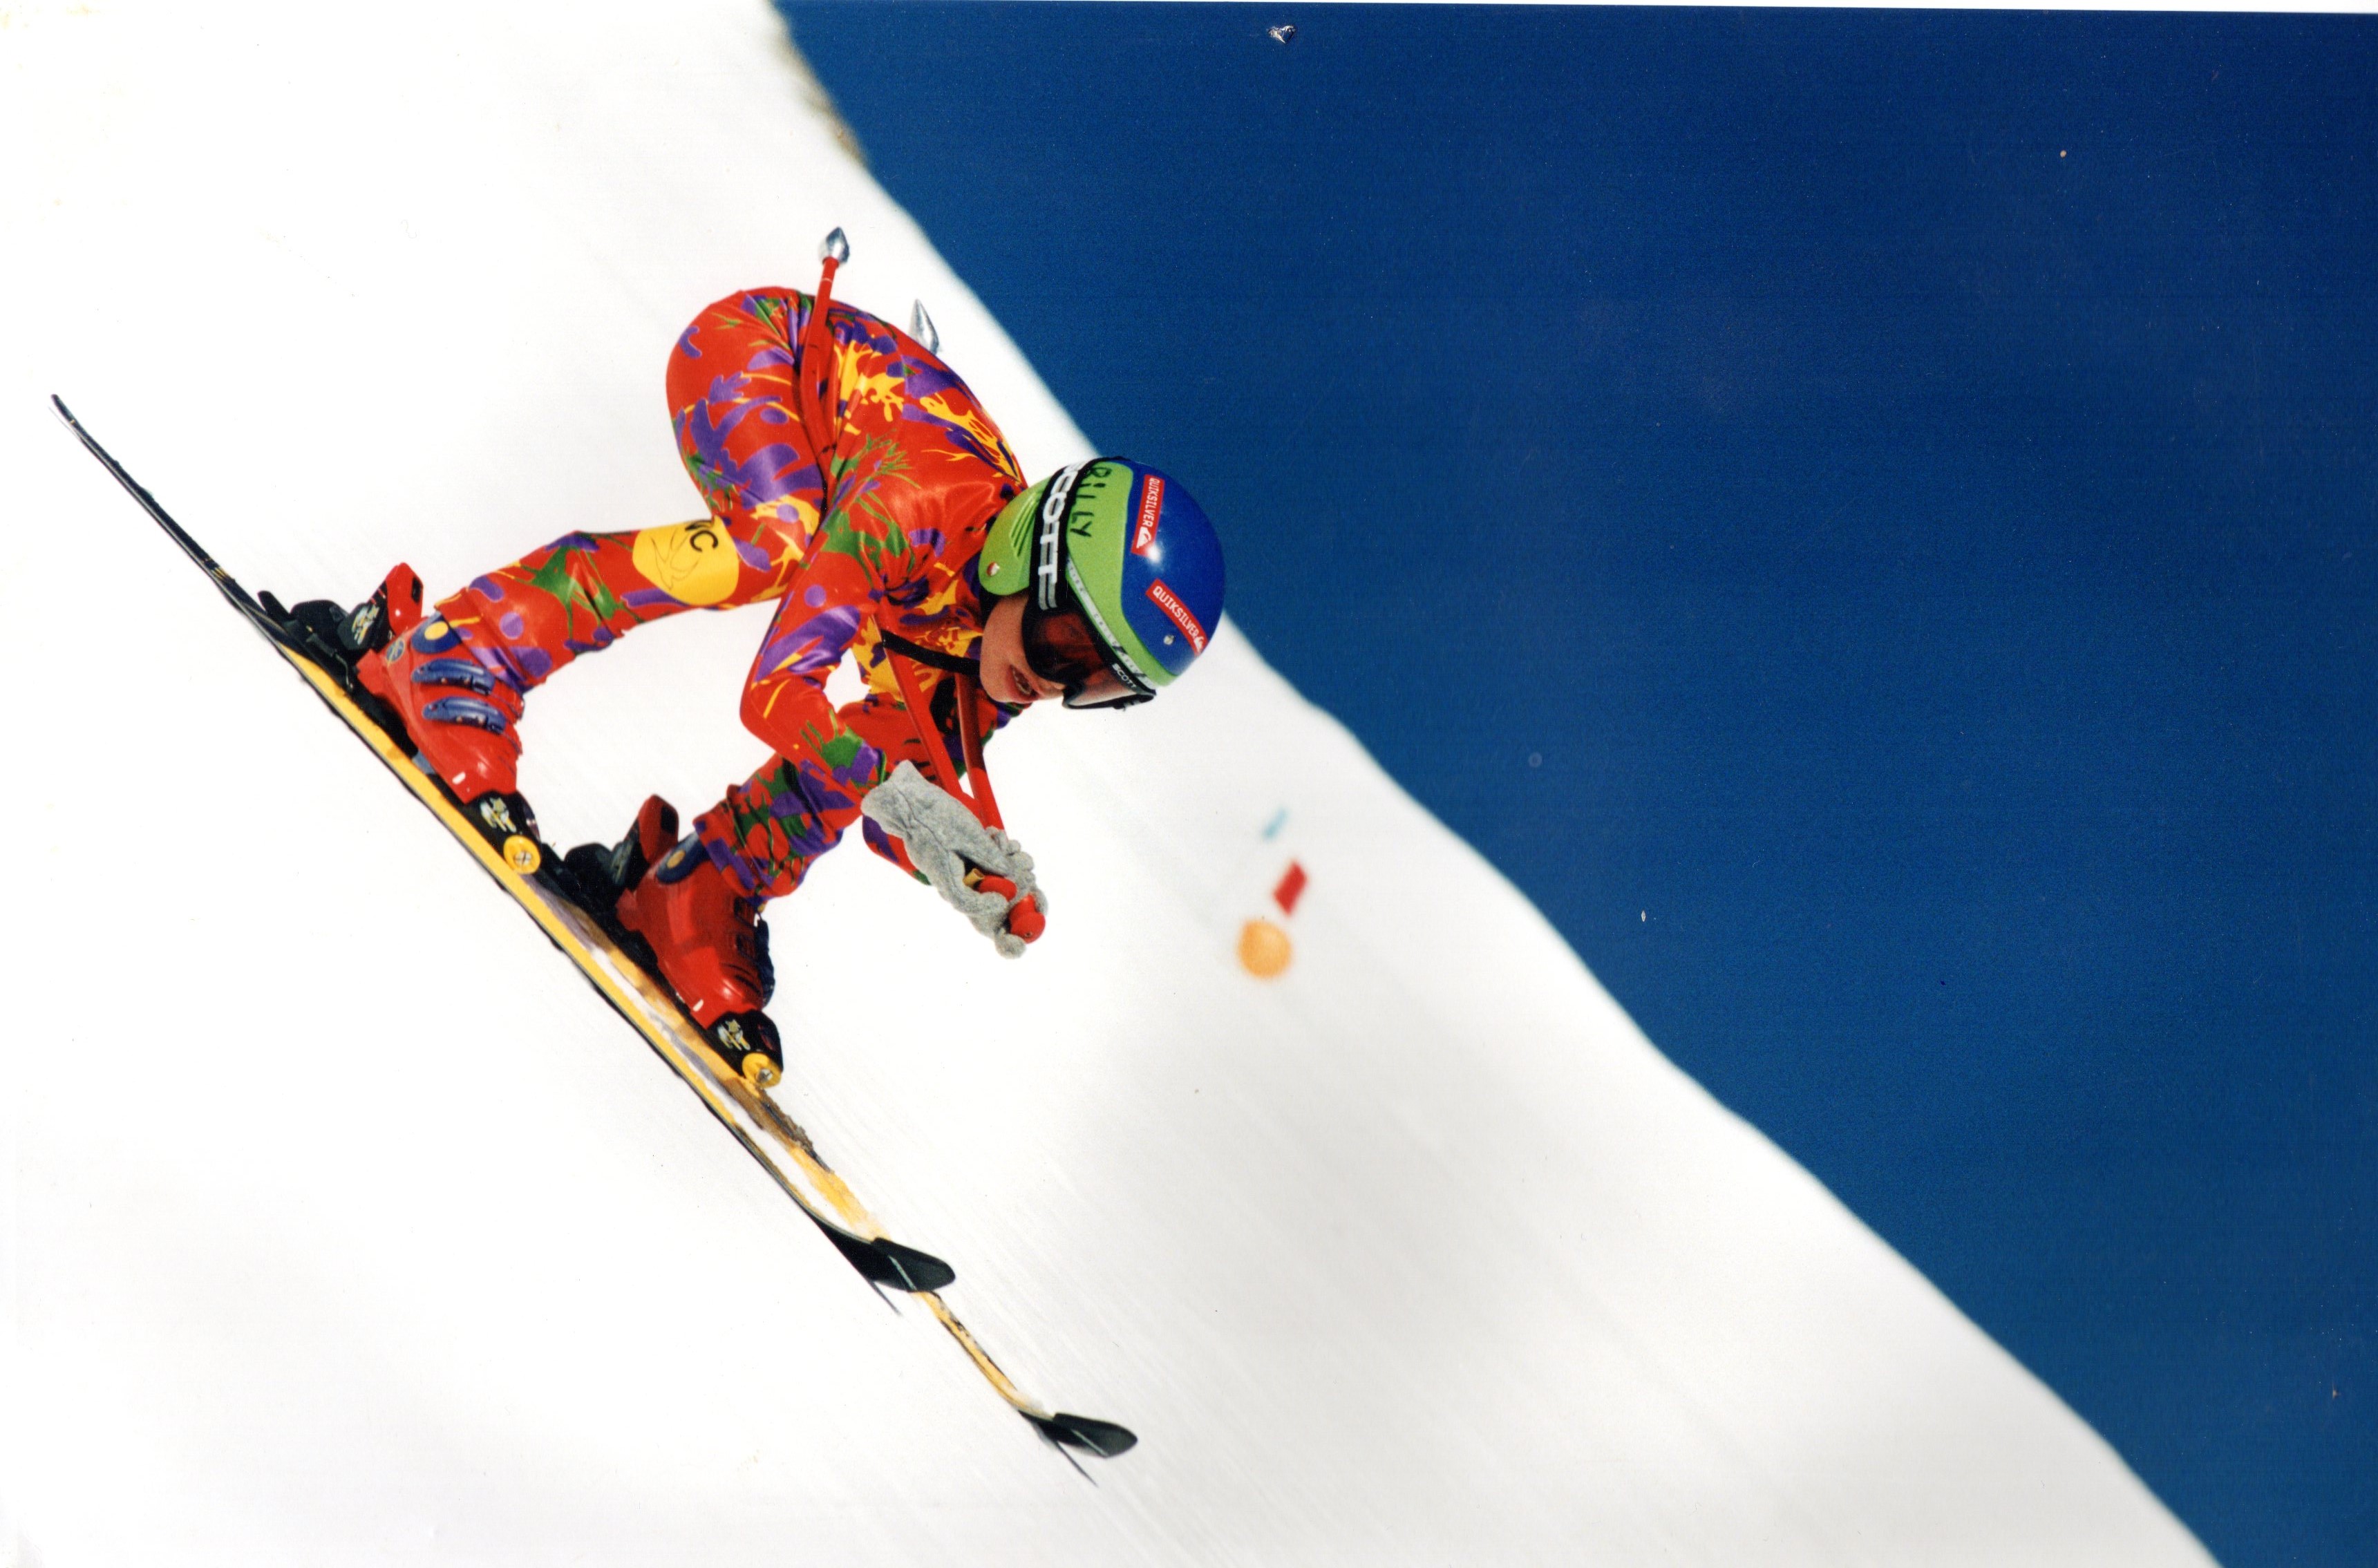 A young Simon Billy when he started speed skiing.